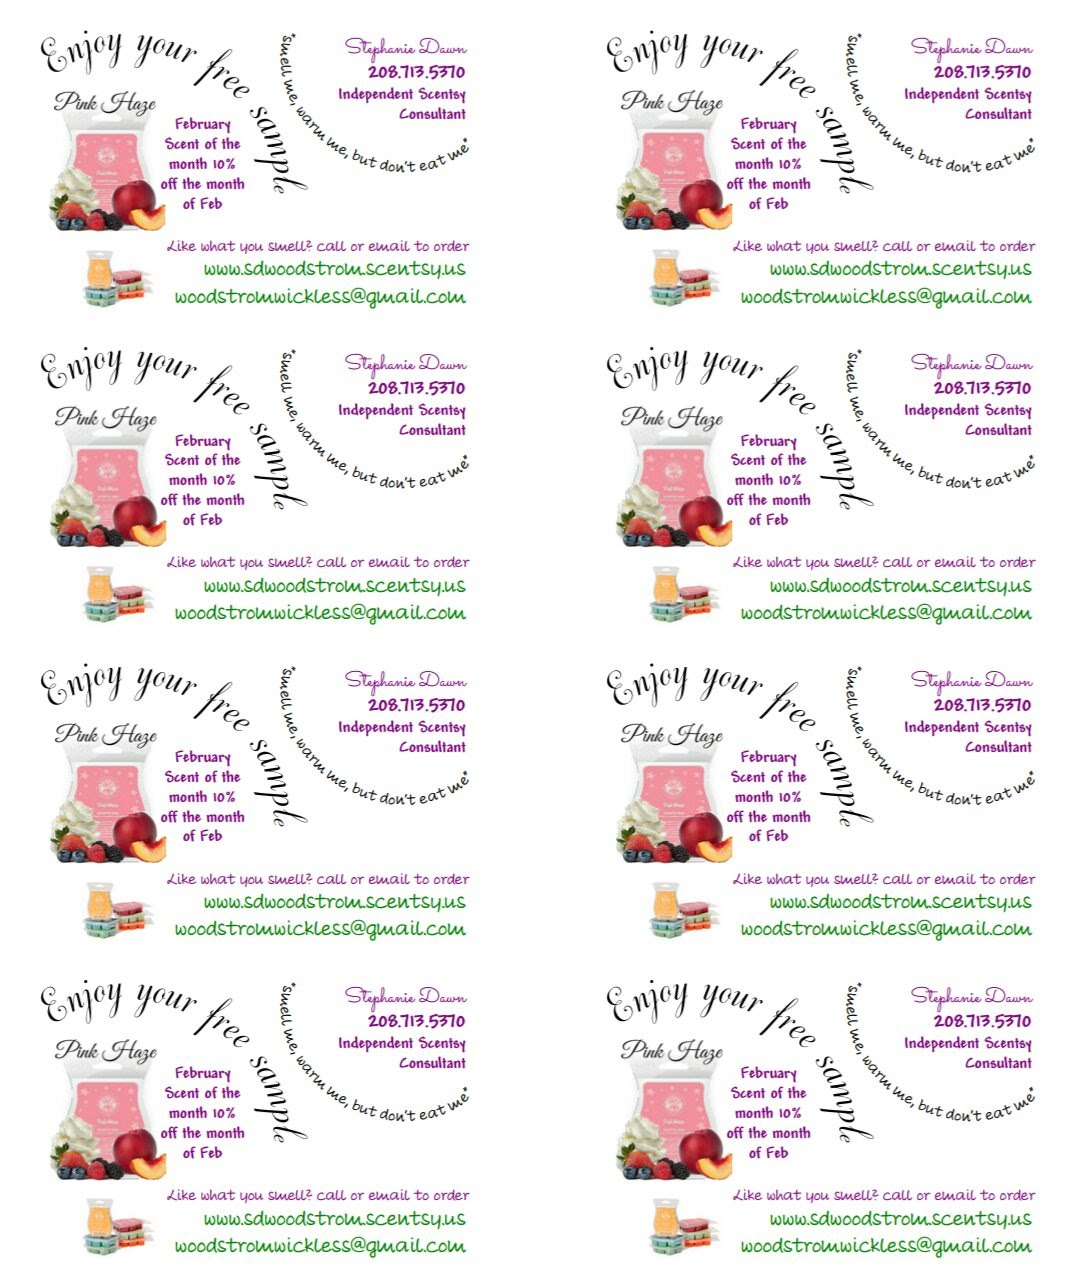 Free Printable Scentsy Business Cards | Download Them Or Print - Free Printable Scentsy Business Cards